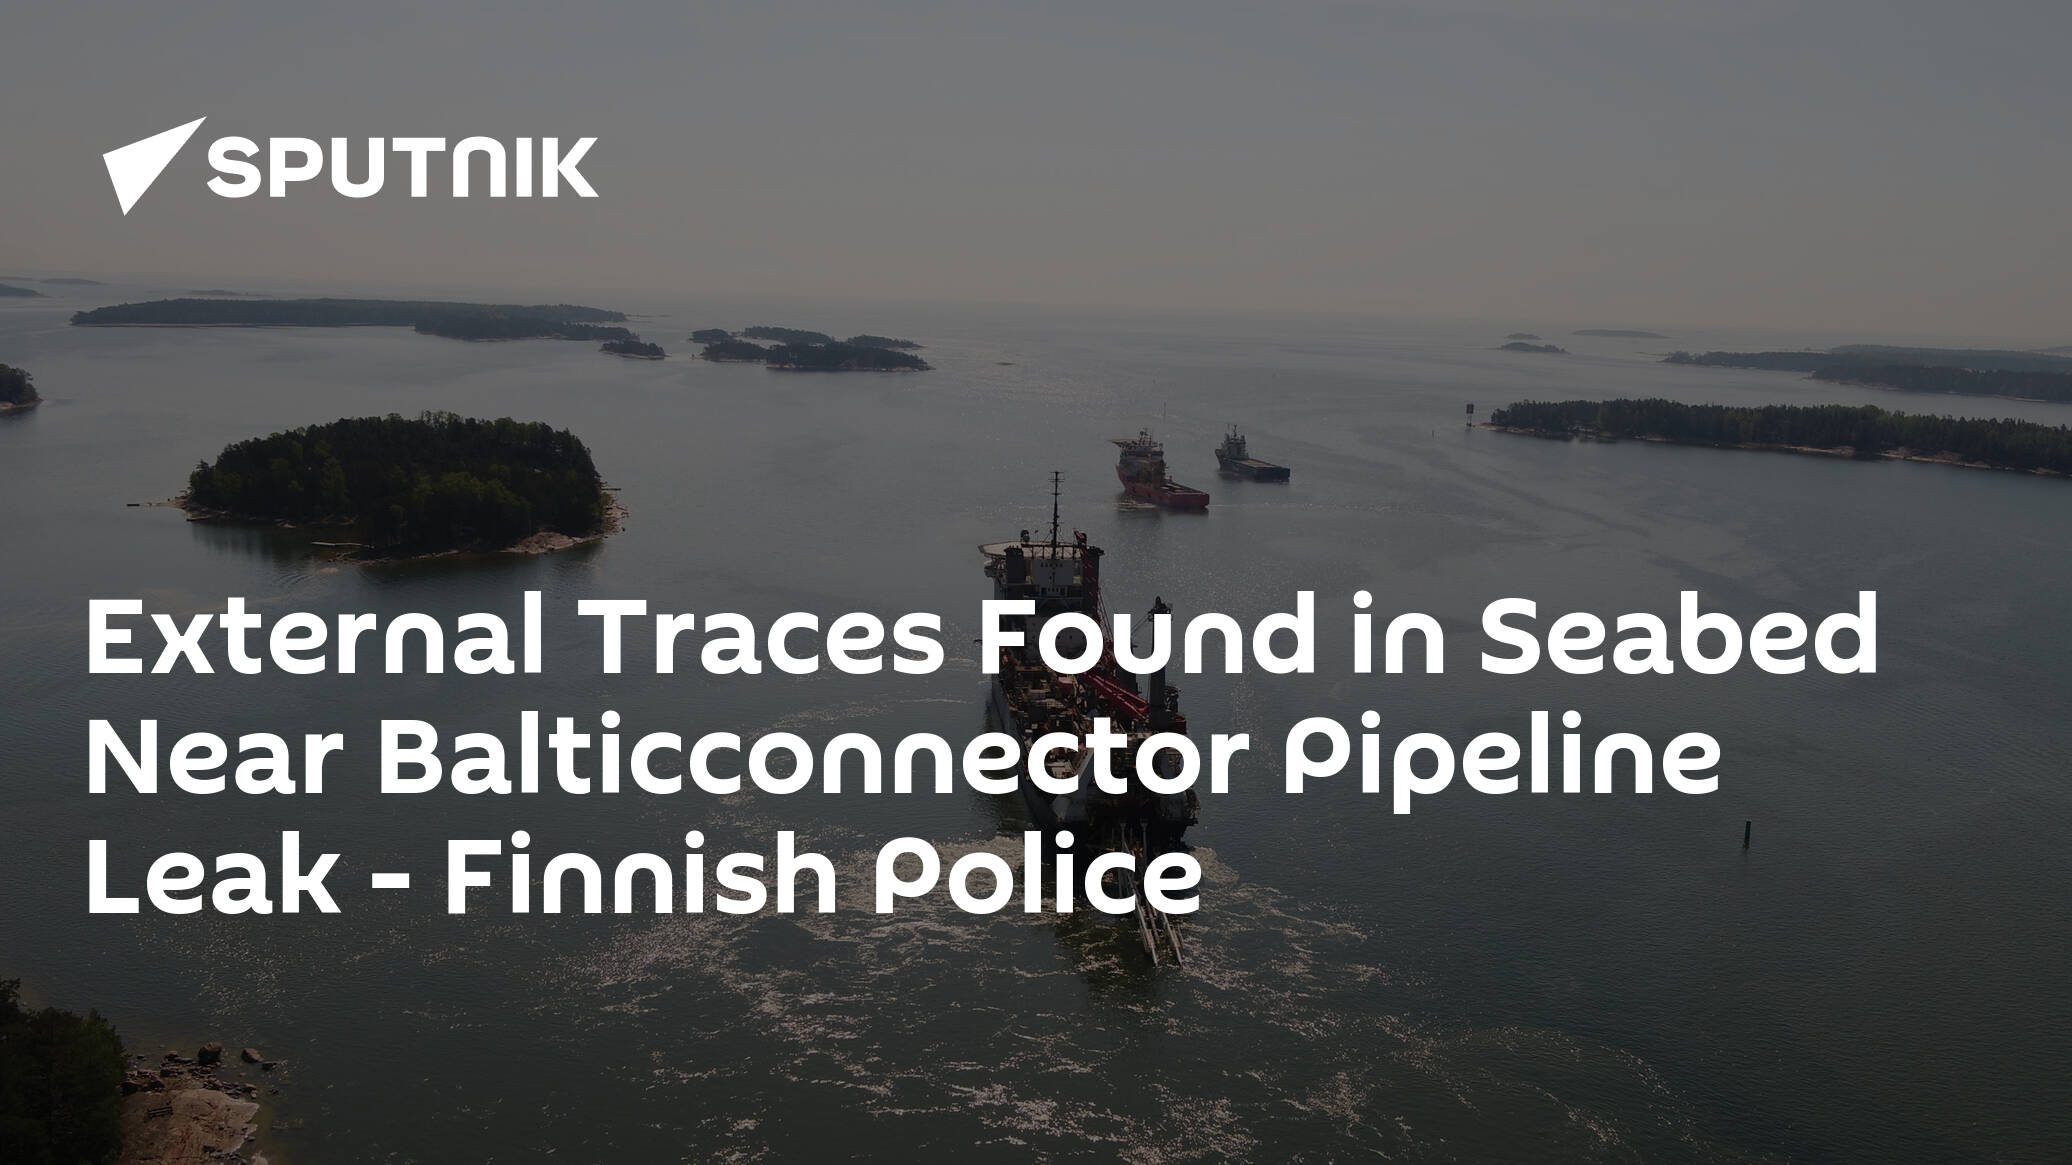 External Traces Found in Seabed Near Balticconnector Pipeline Leak – Finnish Police